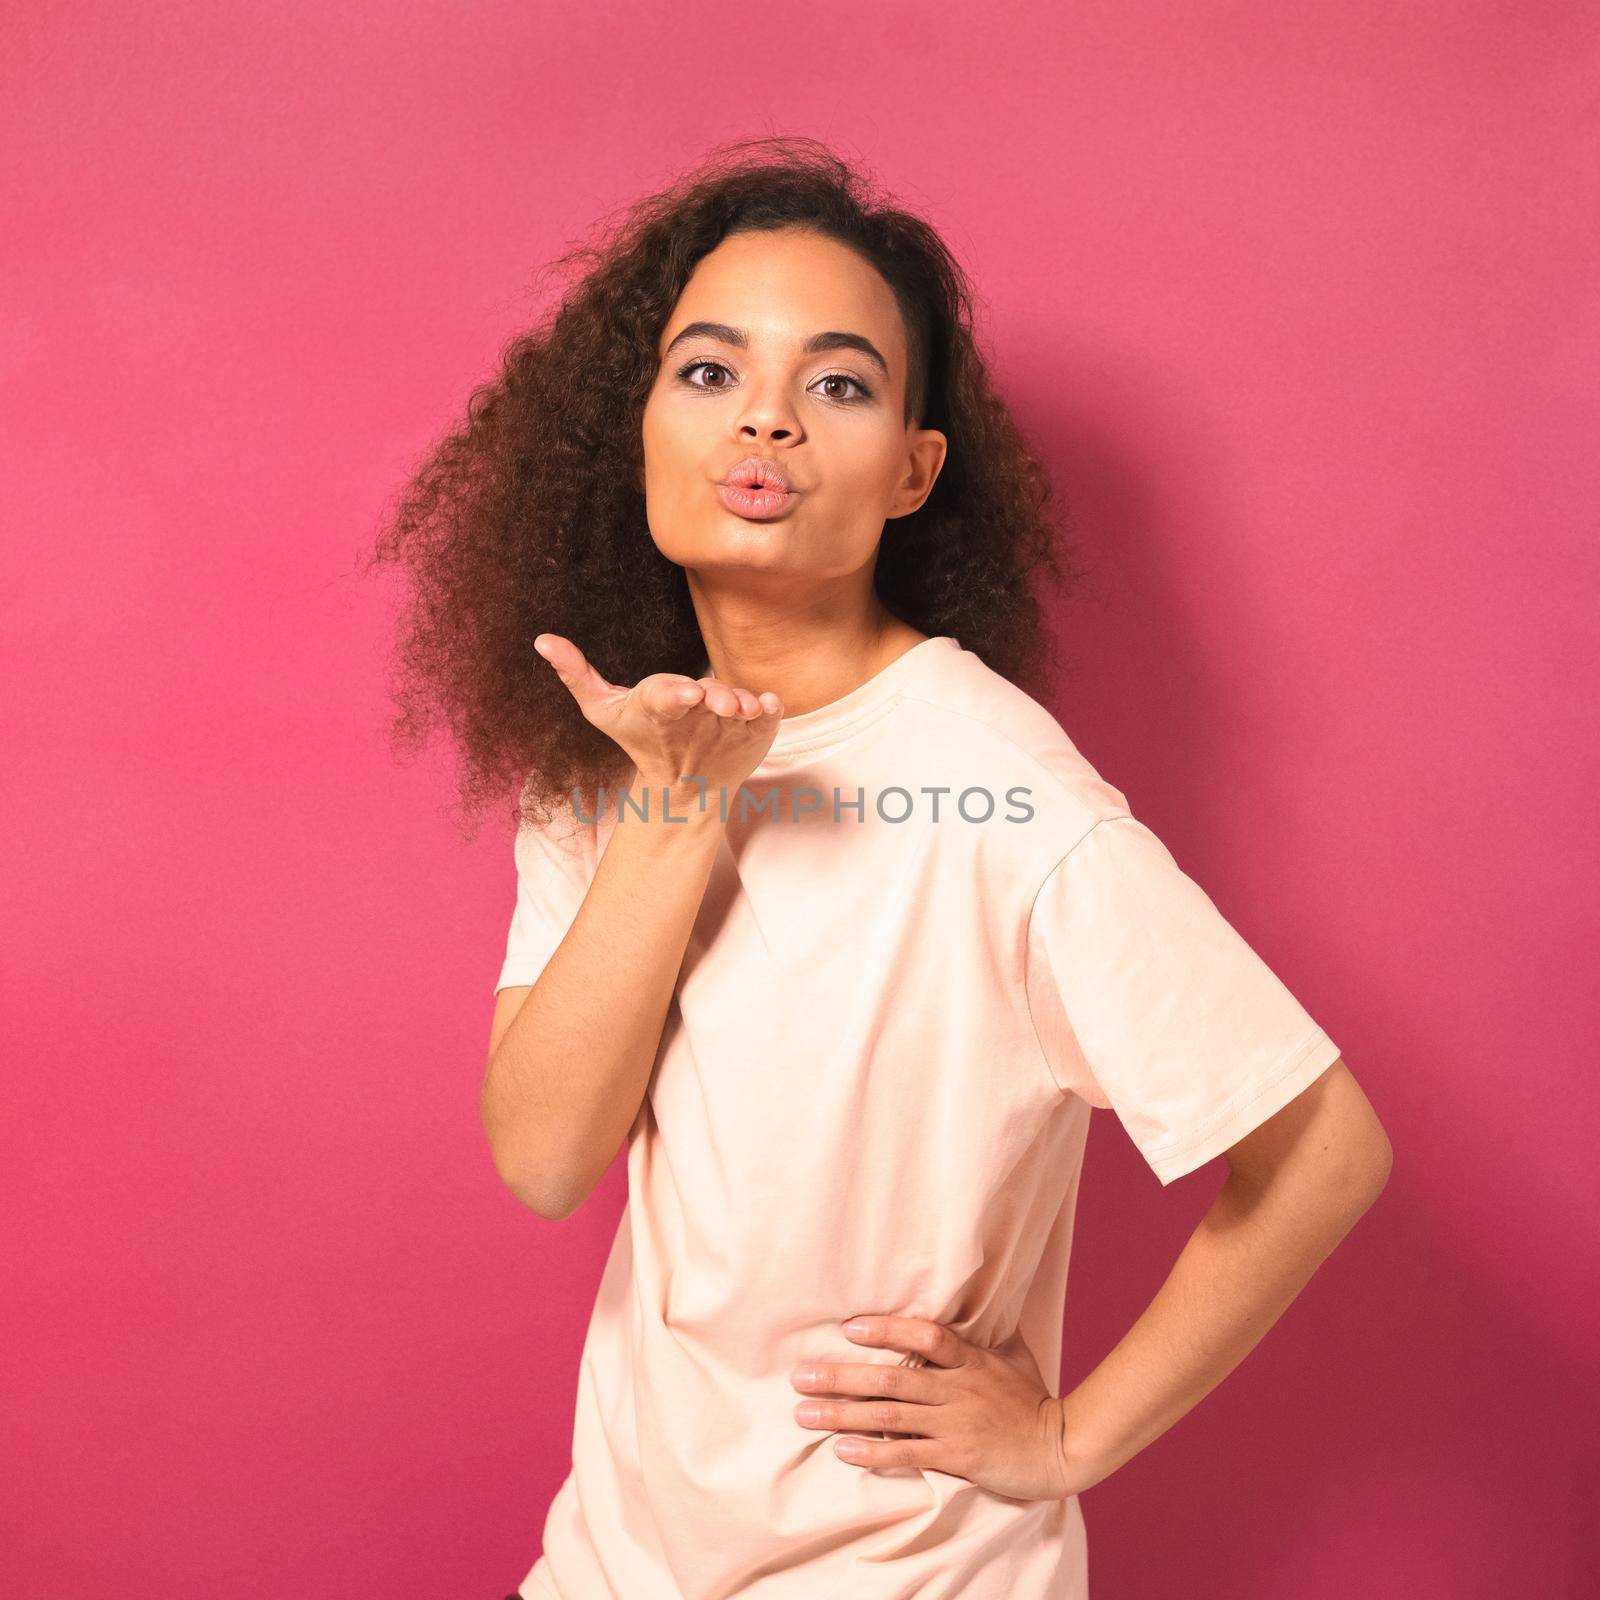 Beautiful young African American woman with Afro hair sending air kisses, looking positively at camera wearing peachy t-shirt isolated on pink background. Beauty concept.